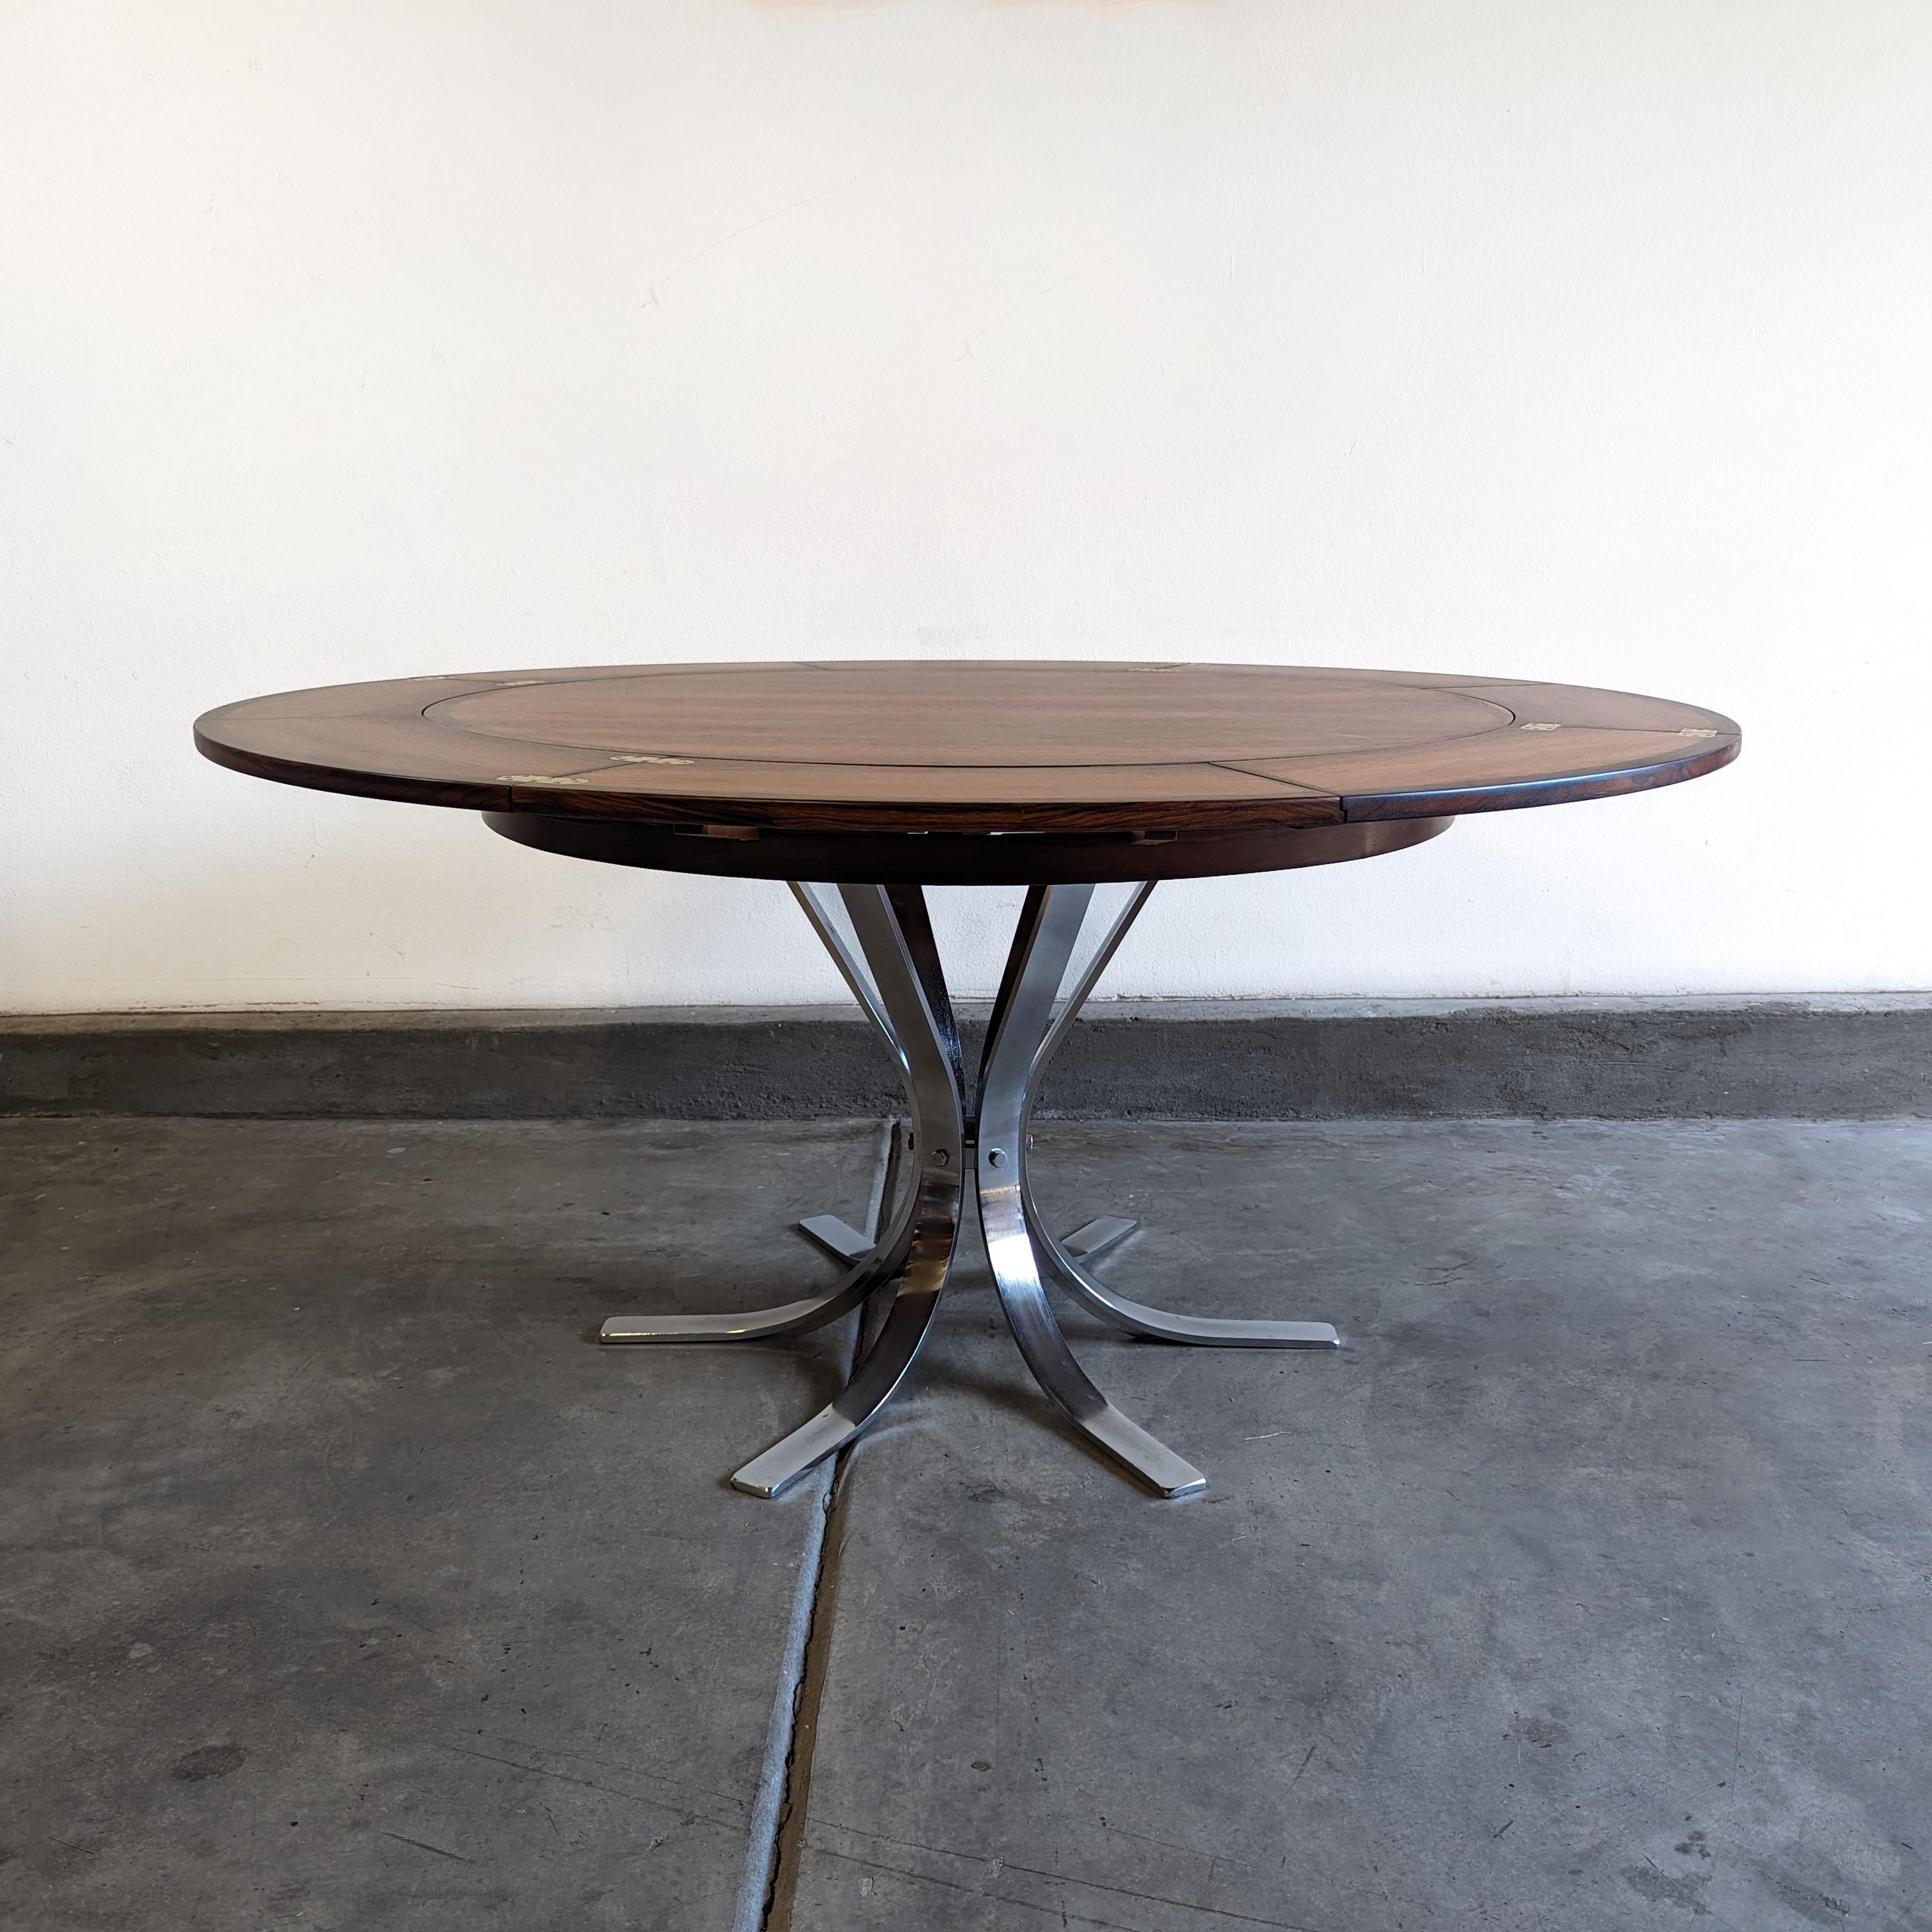 Danish Mid Century Rosewood Flip Flap Circular Dining Table by Dyrlund, c1960s For Sale 2